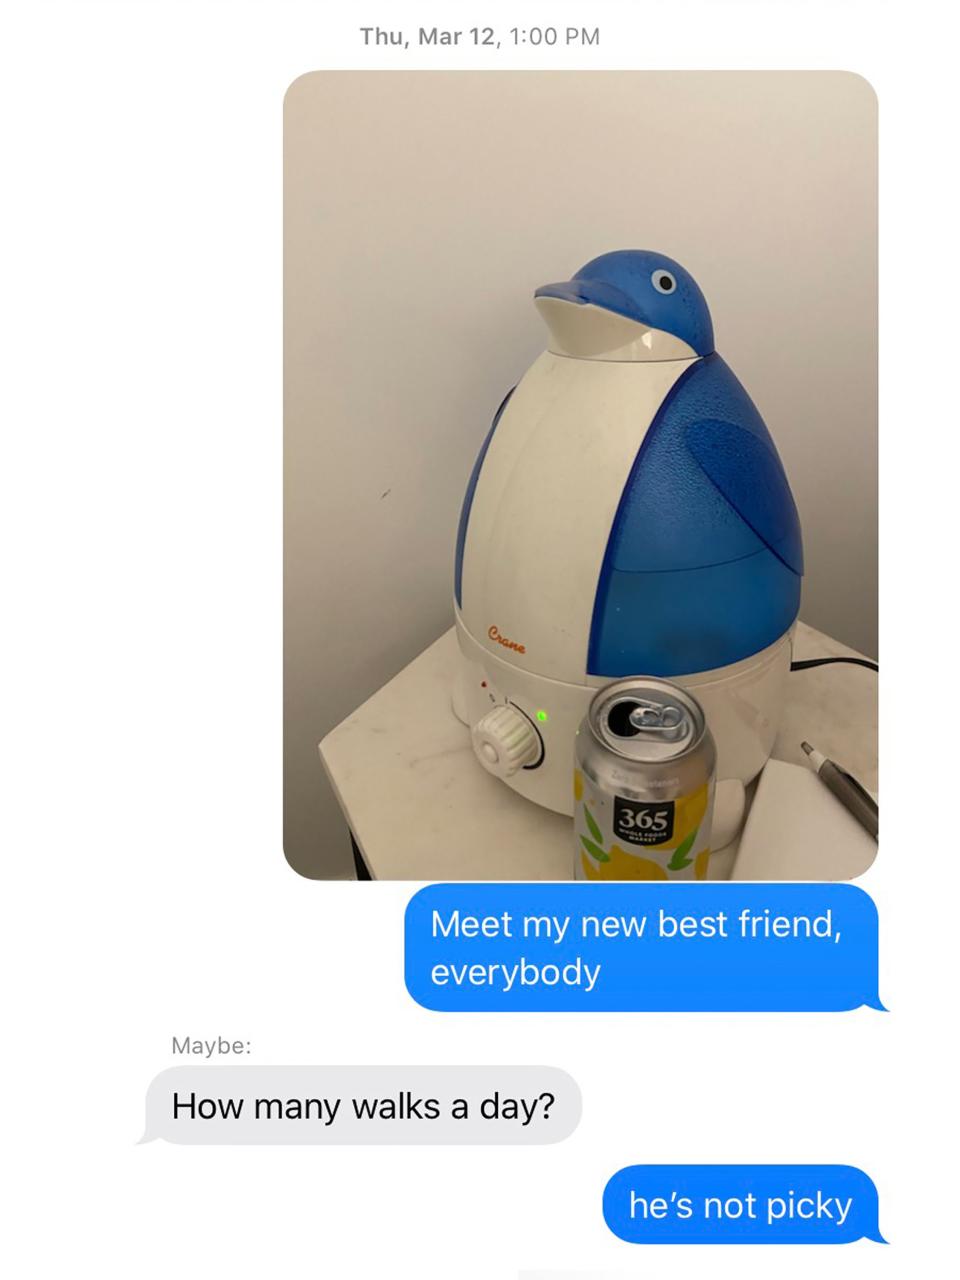 Exposed to COVID-19 at an event and feeling ill, a penguin humidifier is (goofy) solace.